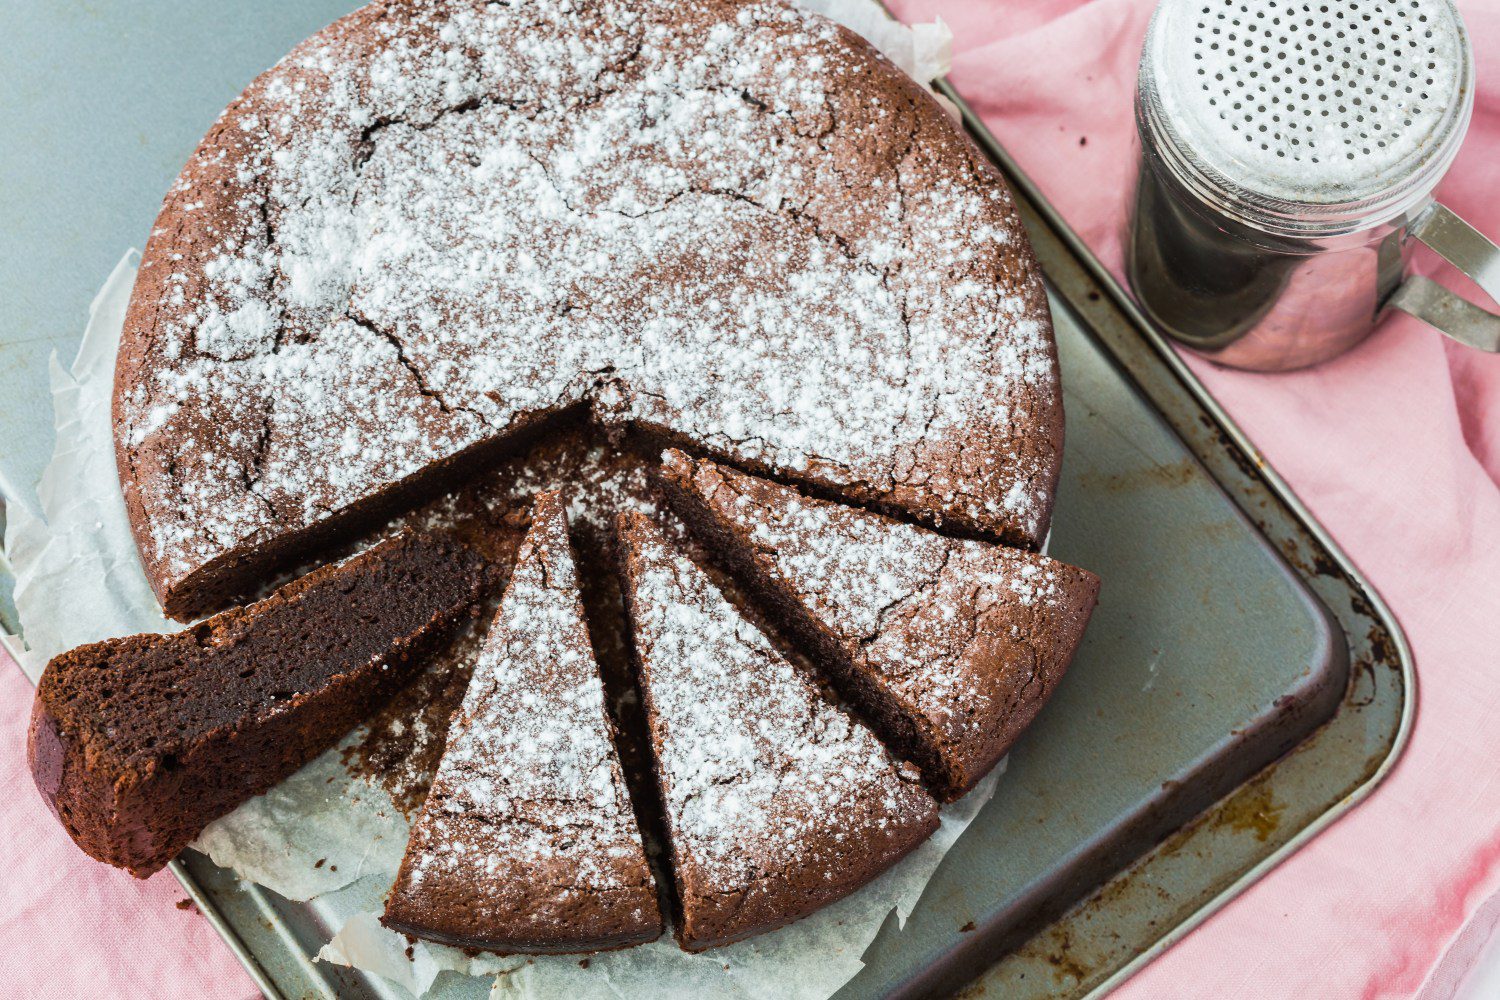 Oh yum! Got your Thermomix and ready to get baking? Here’s 10 awesome Thermomix cake recipes to try. Which do you like best?